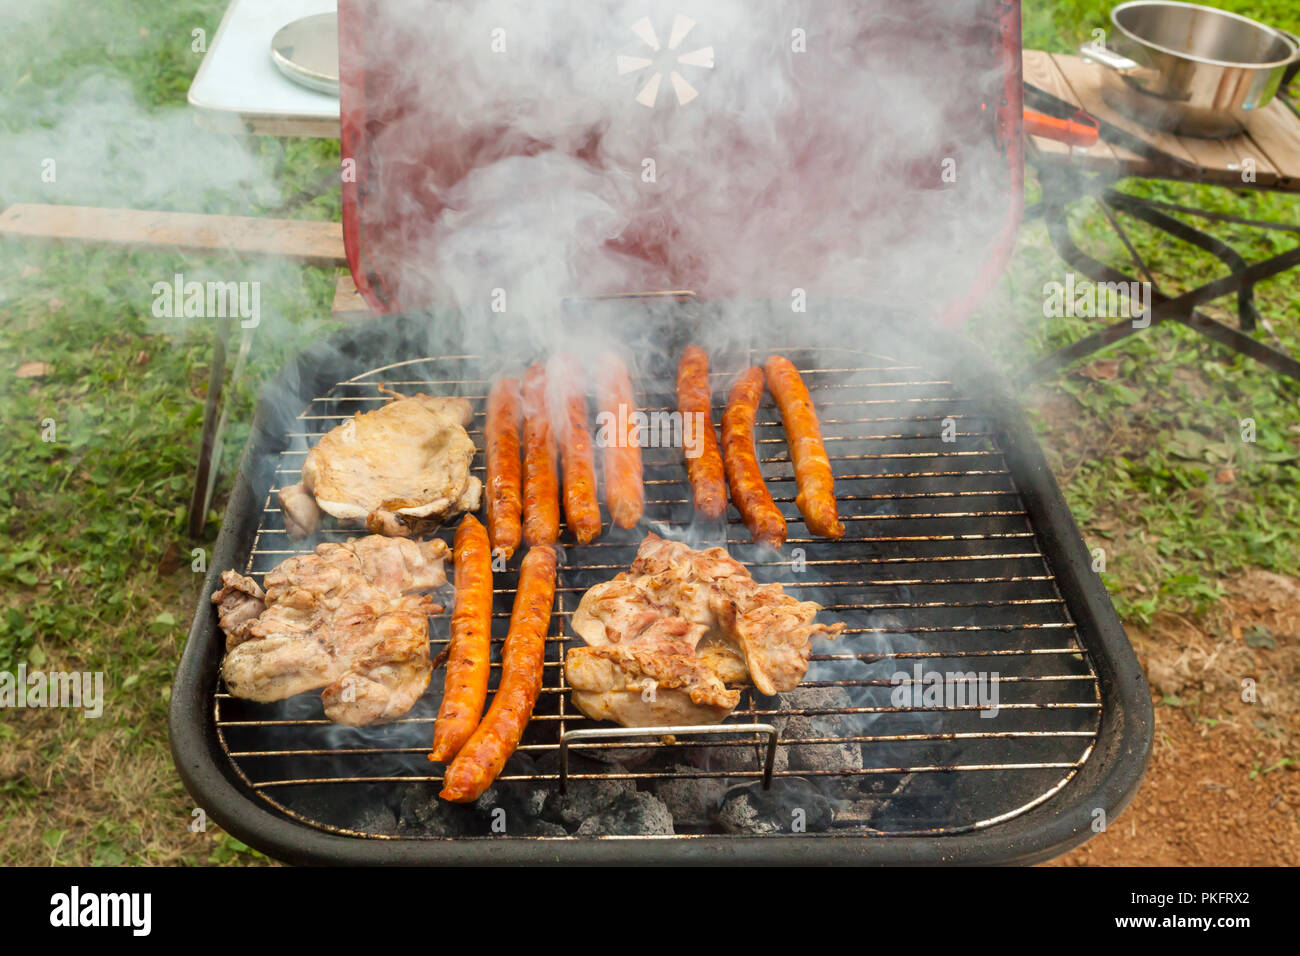 Variety of meat on an outdoor, sunlit, smoking barbecue grill Stock Photo